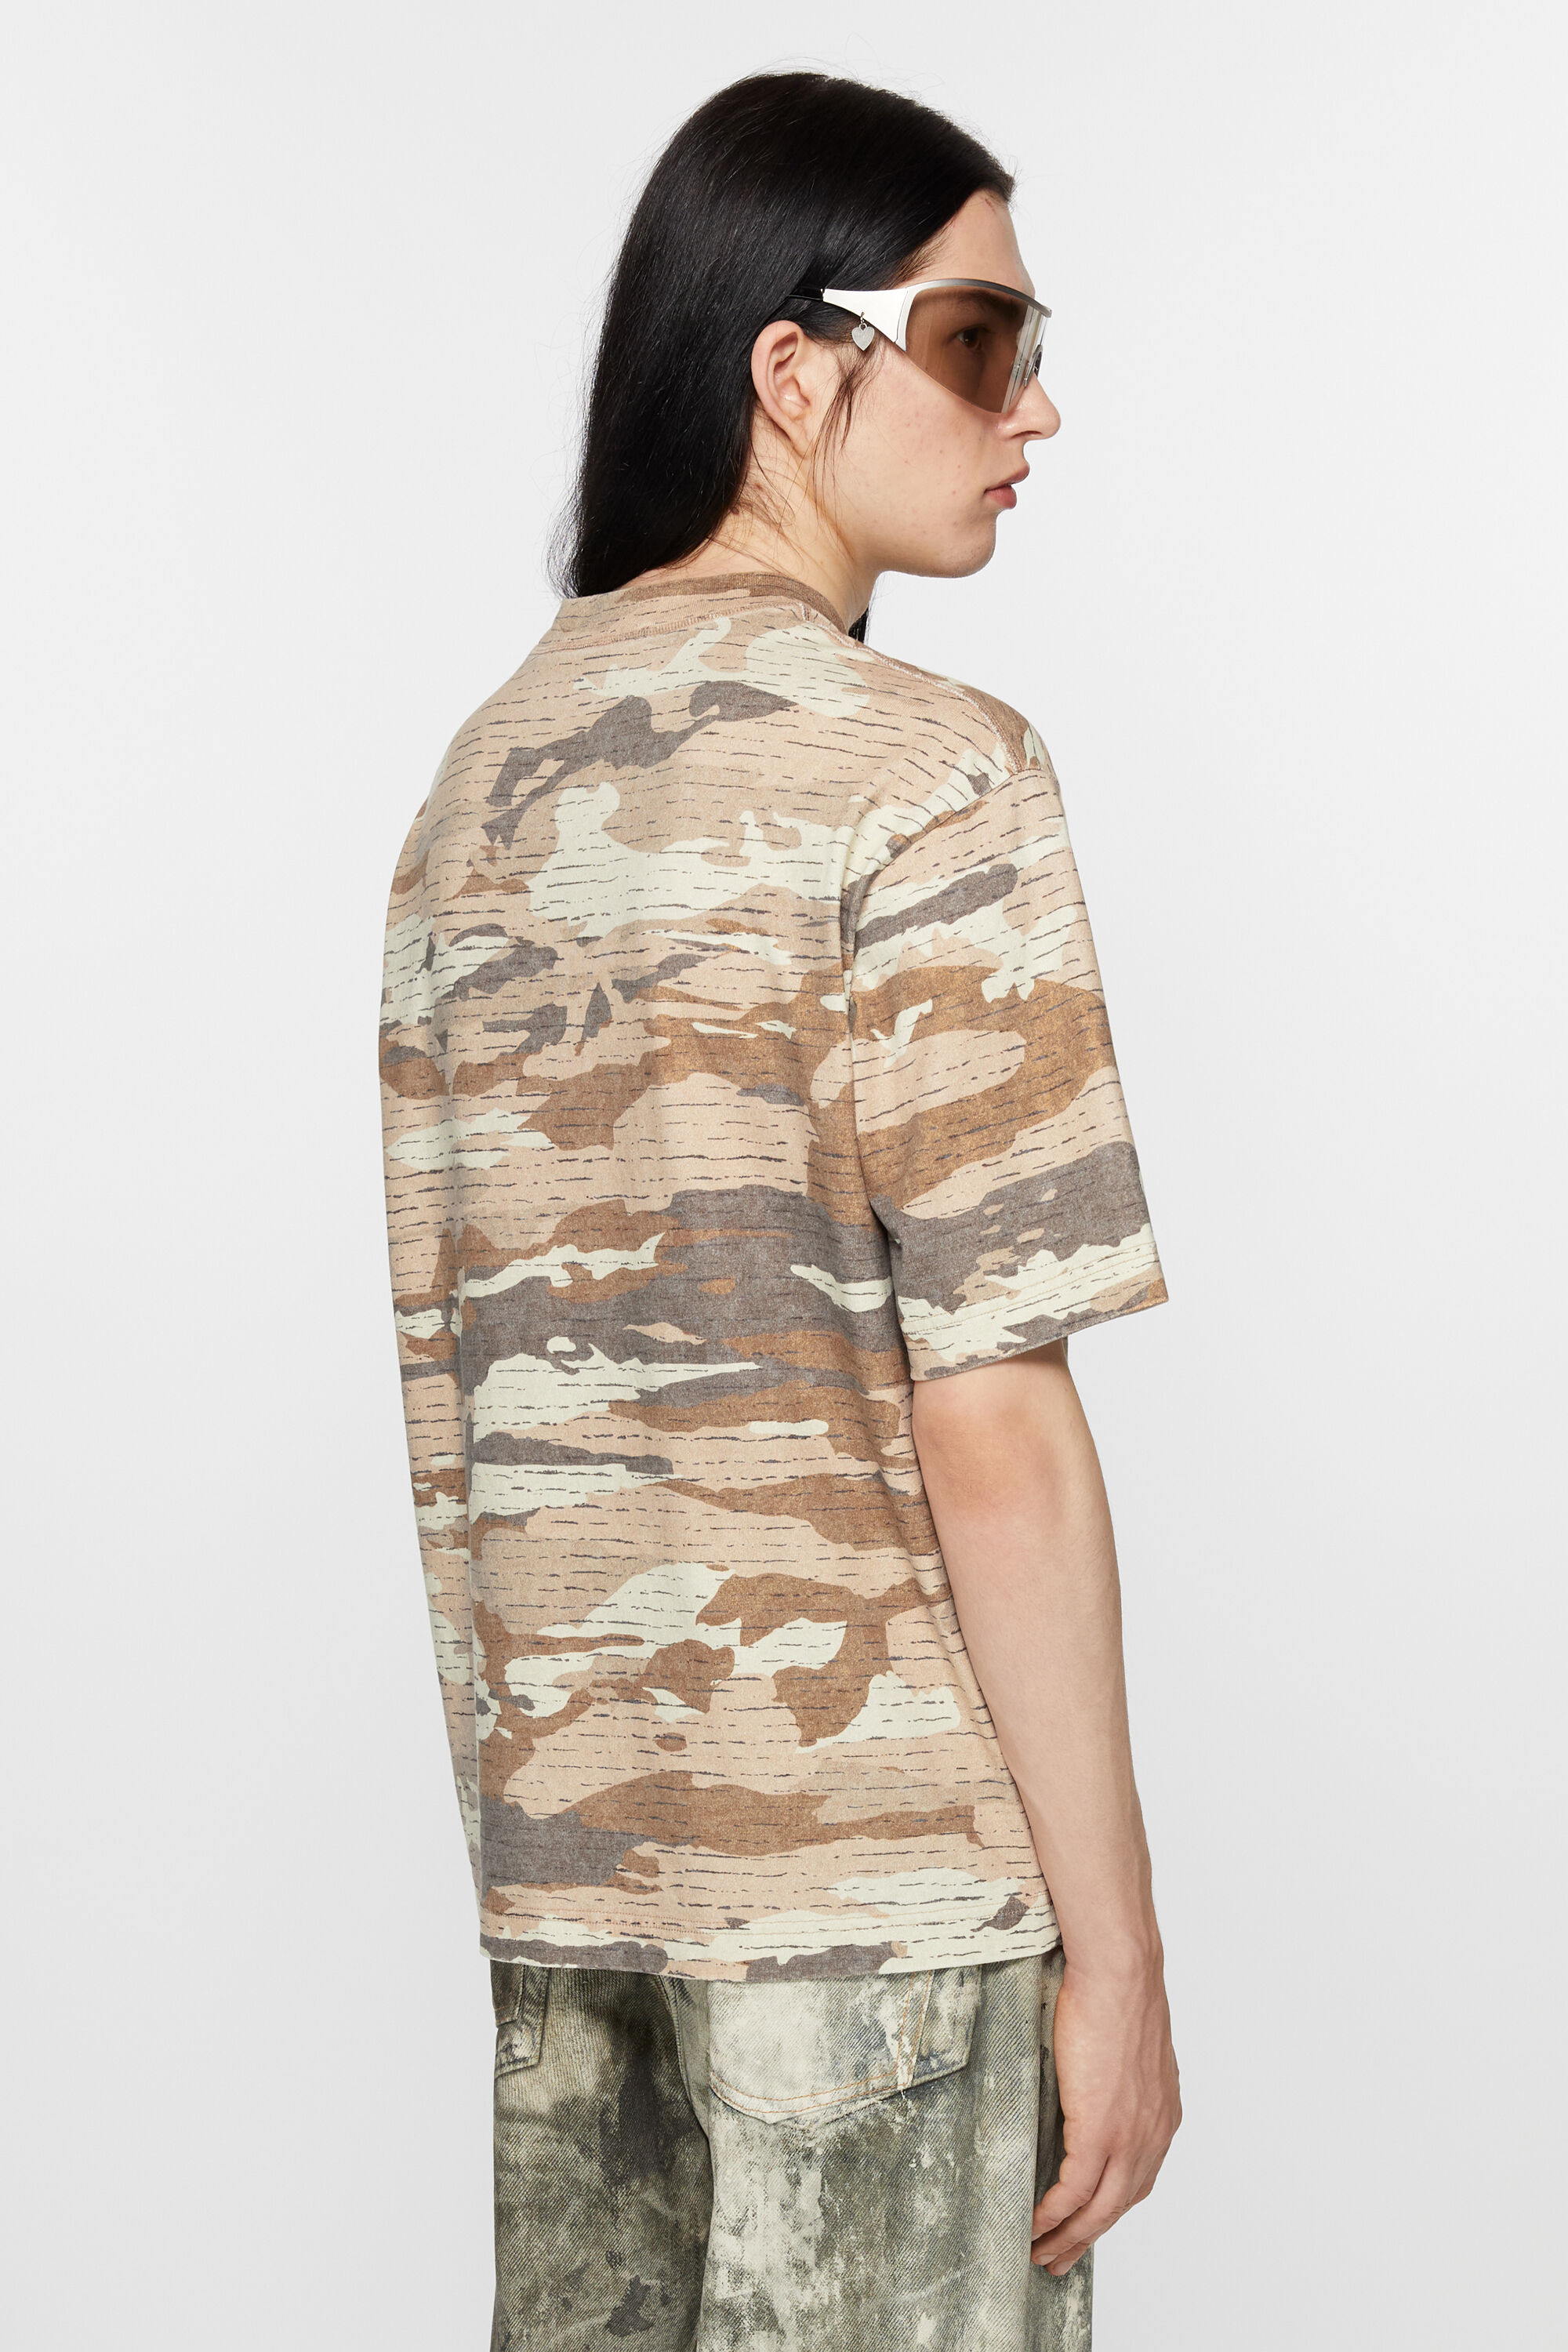 Acne Studios Green Camouflage T-Shirt